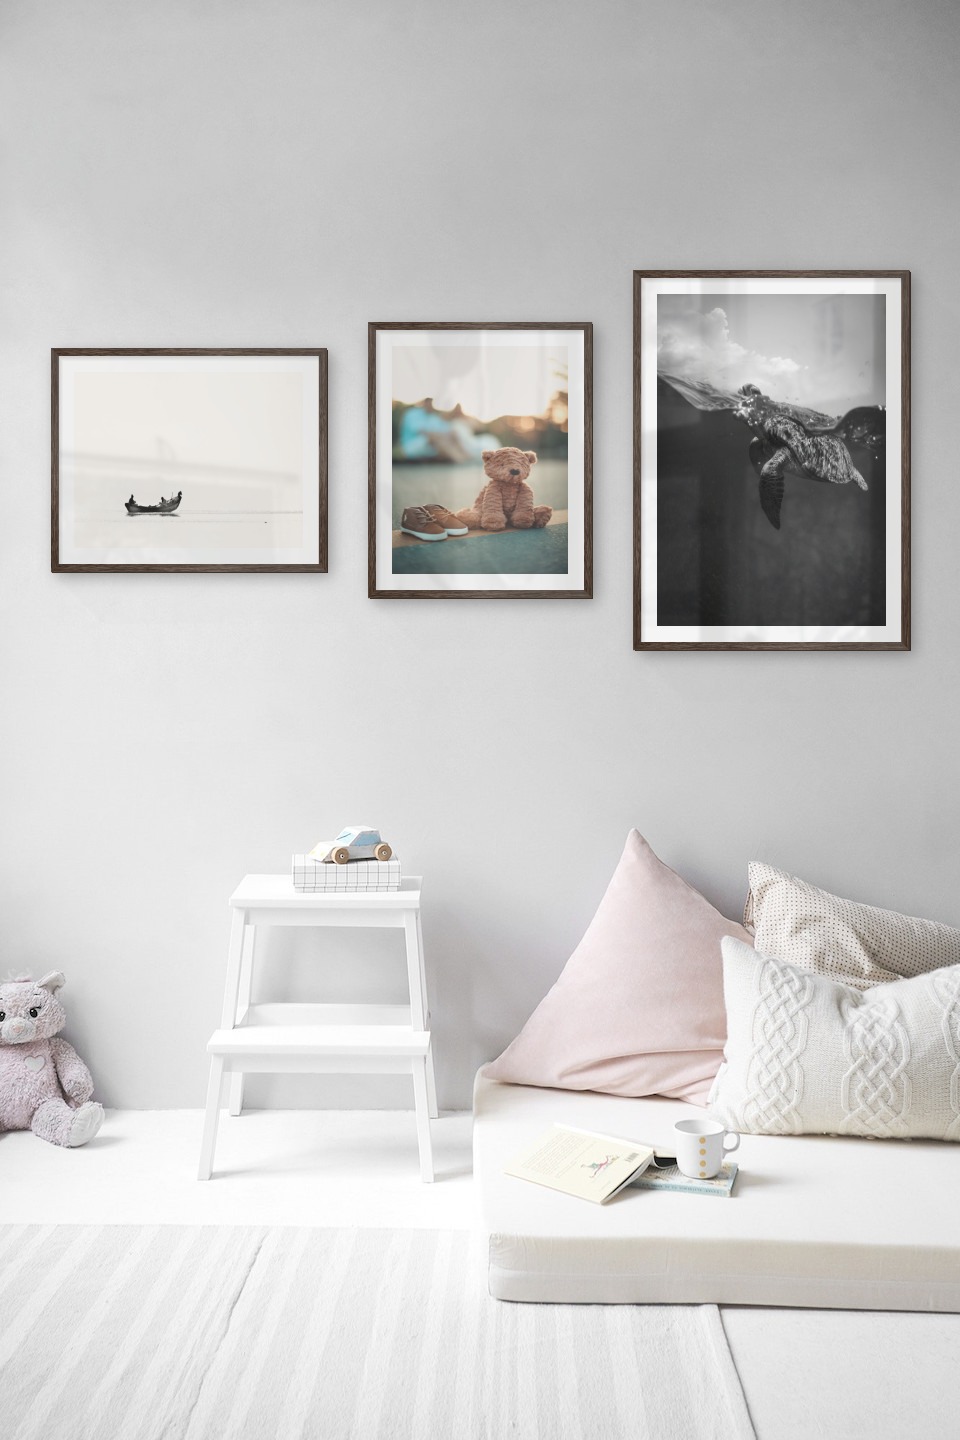 Gallery wall with picture frames in dark wood in sizes 40x50 and 50x70 with prints "People in boat", "Teddy bear on the street" and "Turtle"